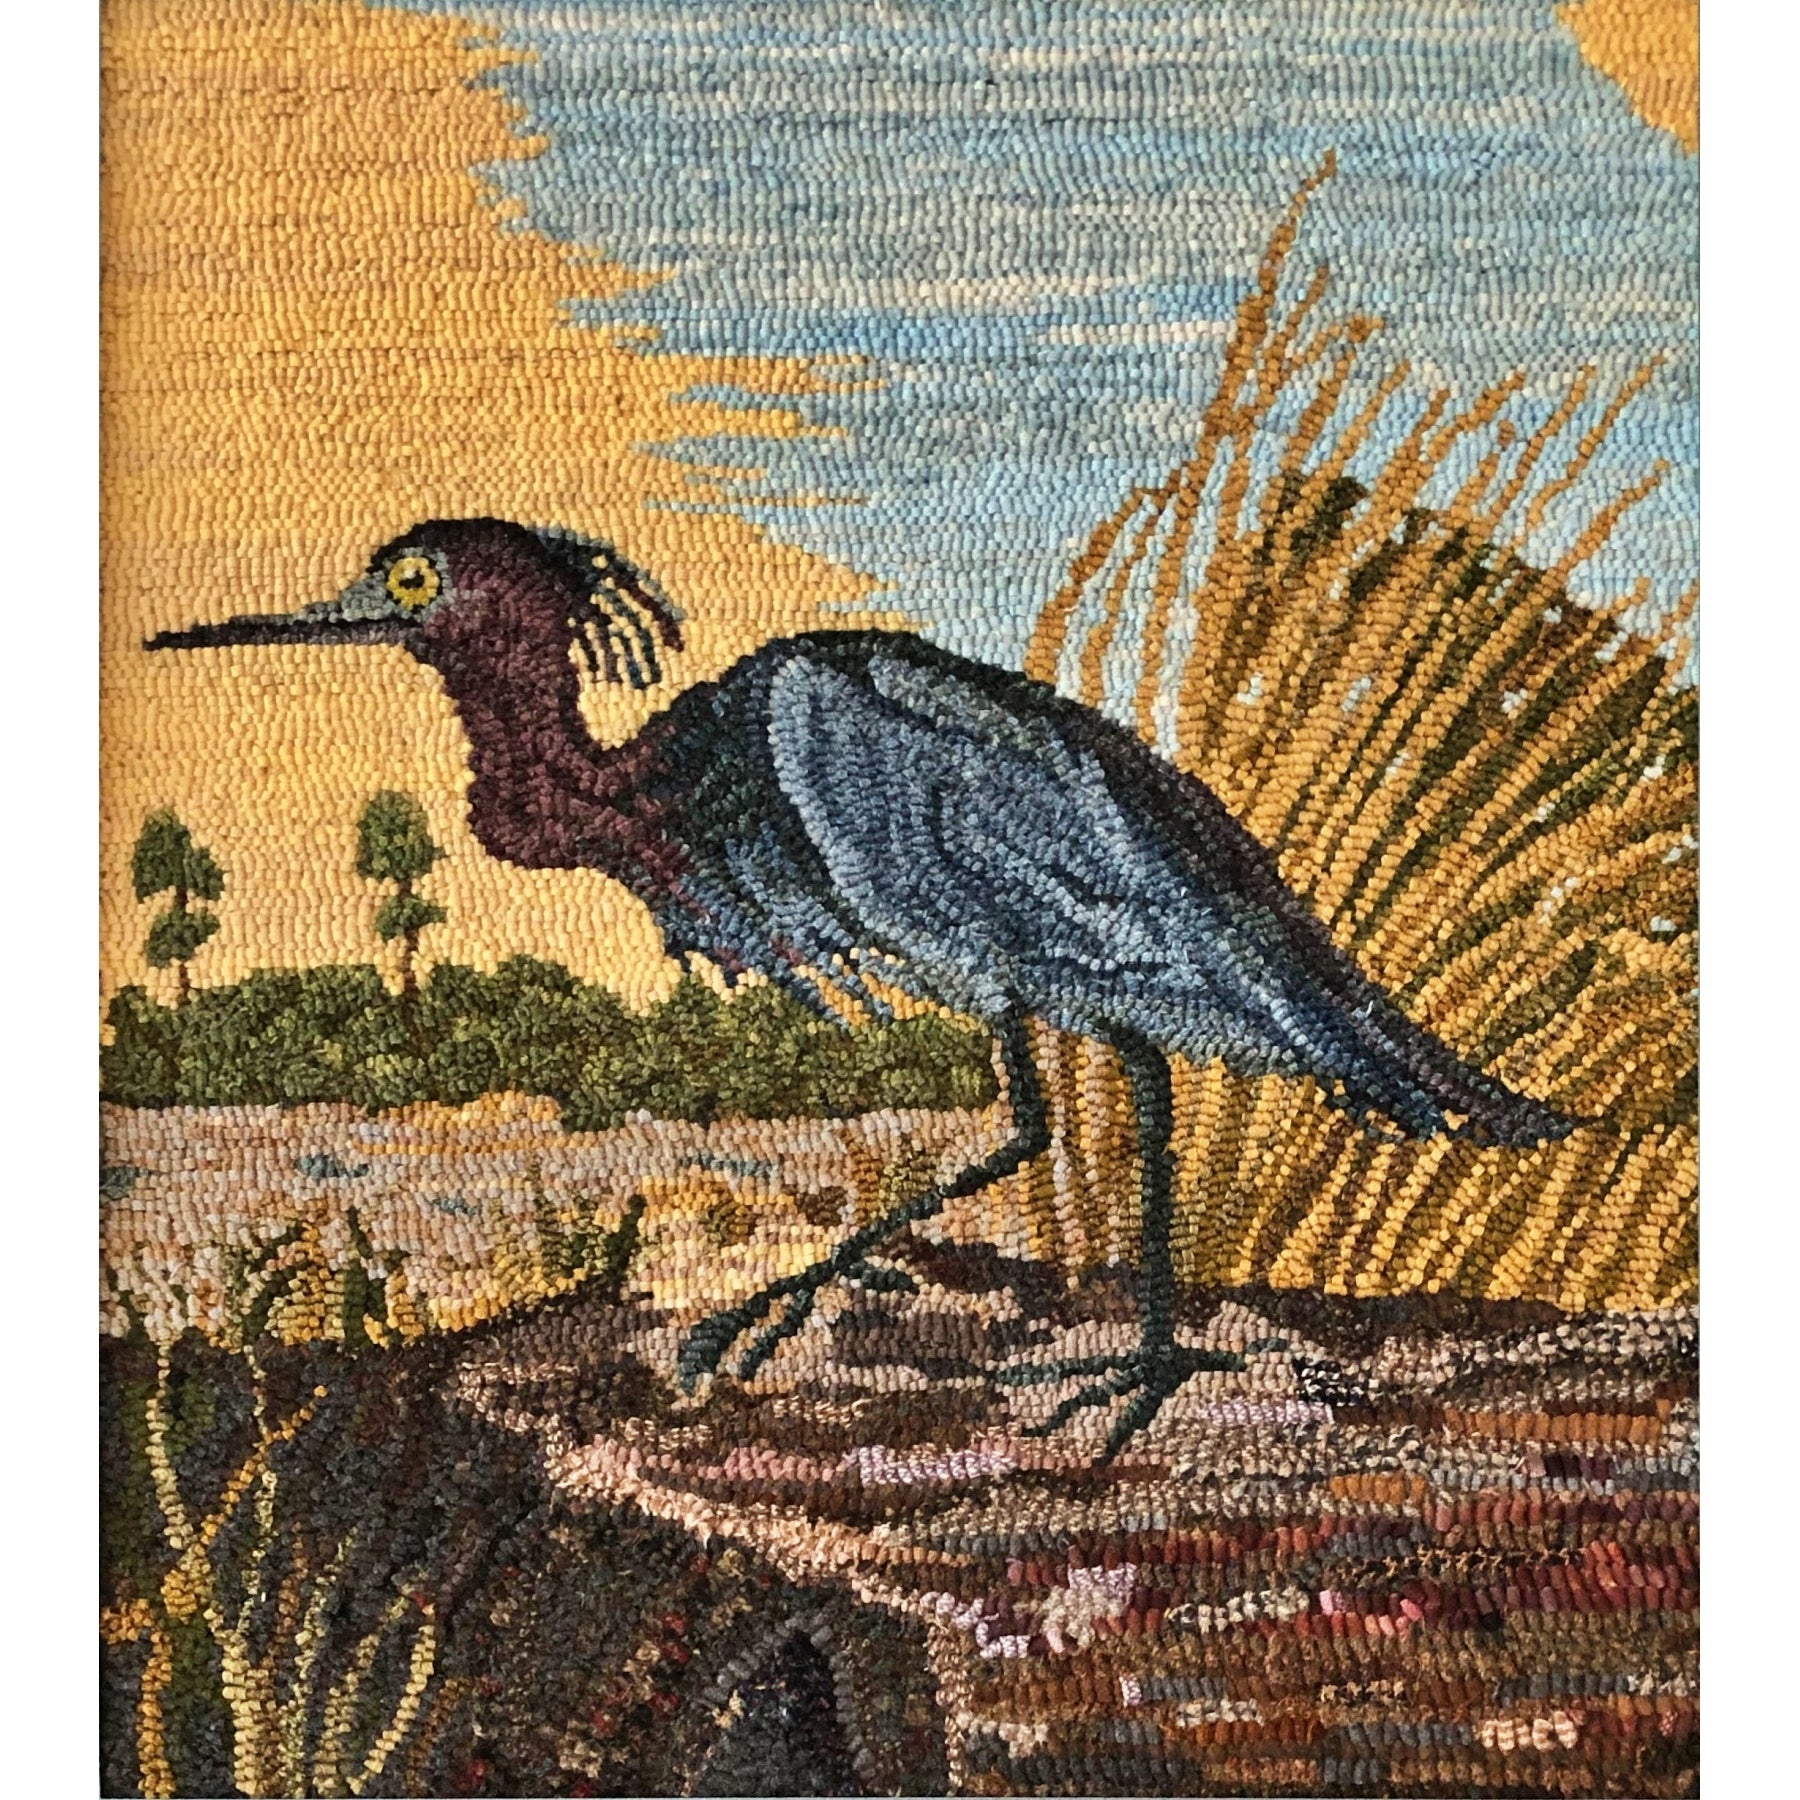 Little Blue Heron, rug hooked by Janet Williams